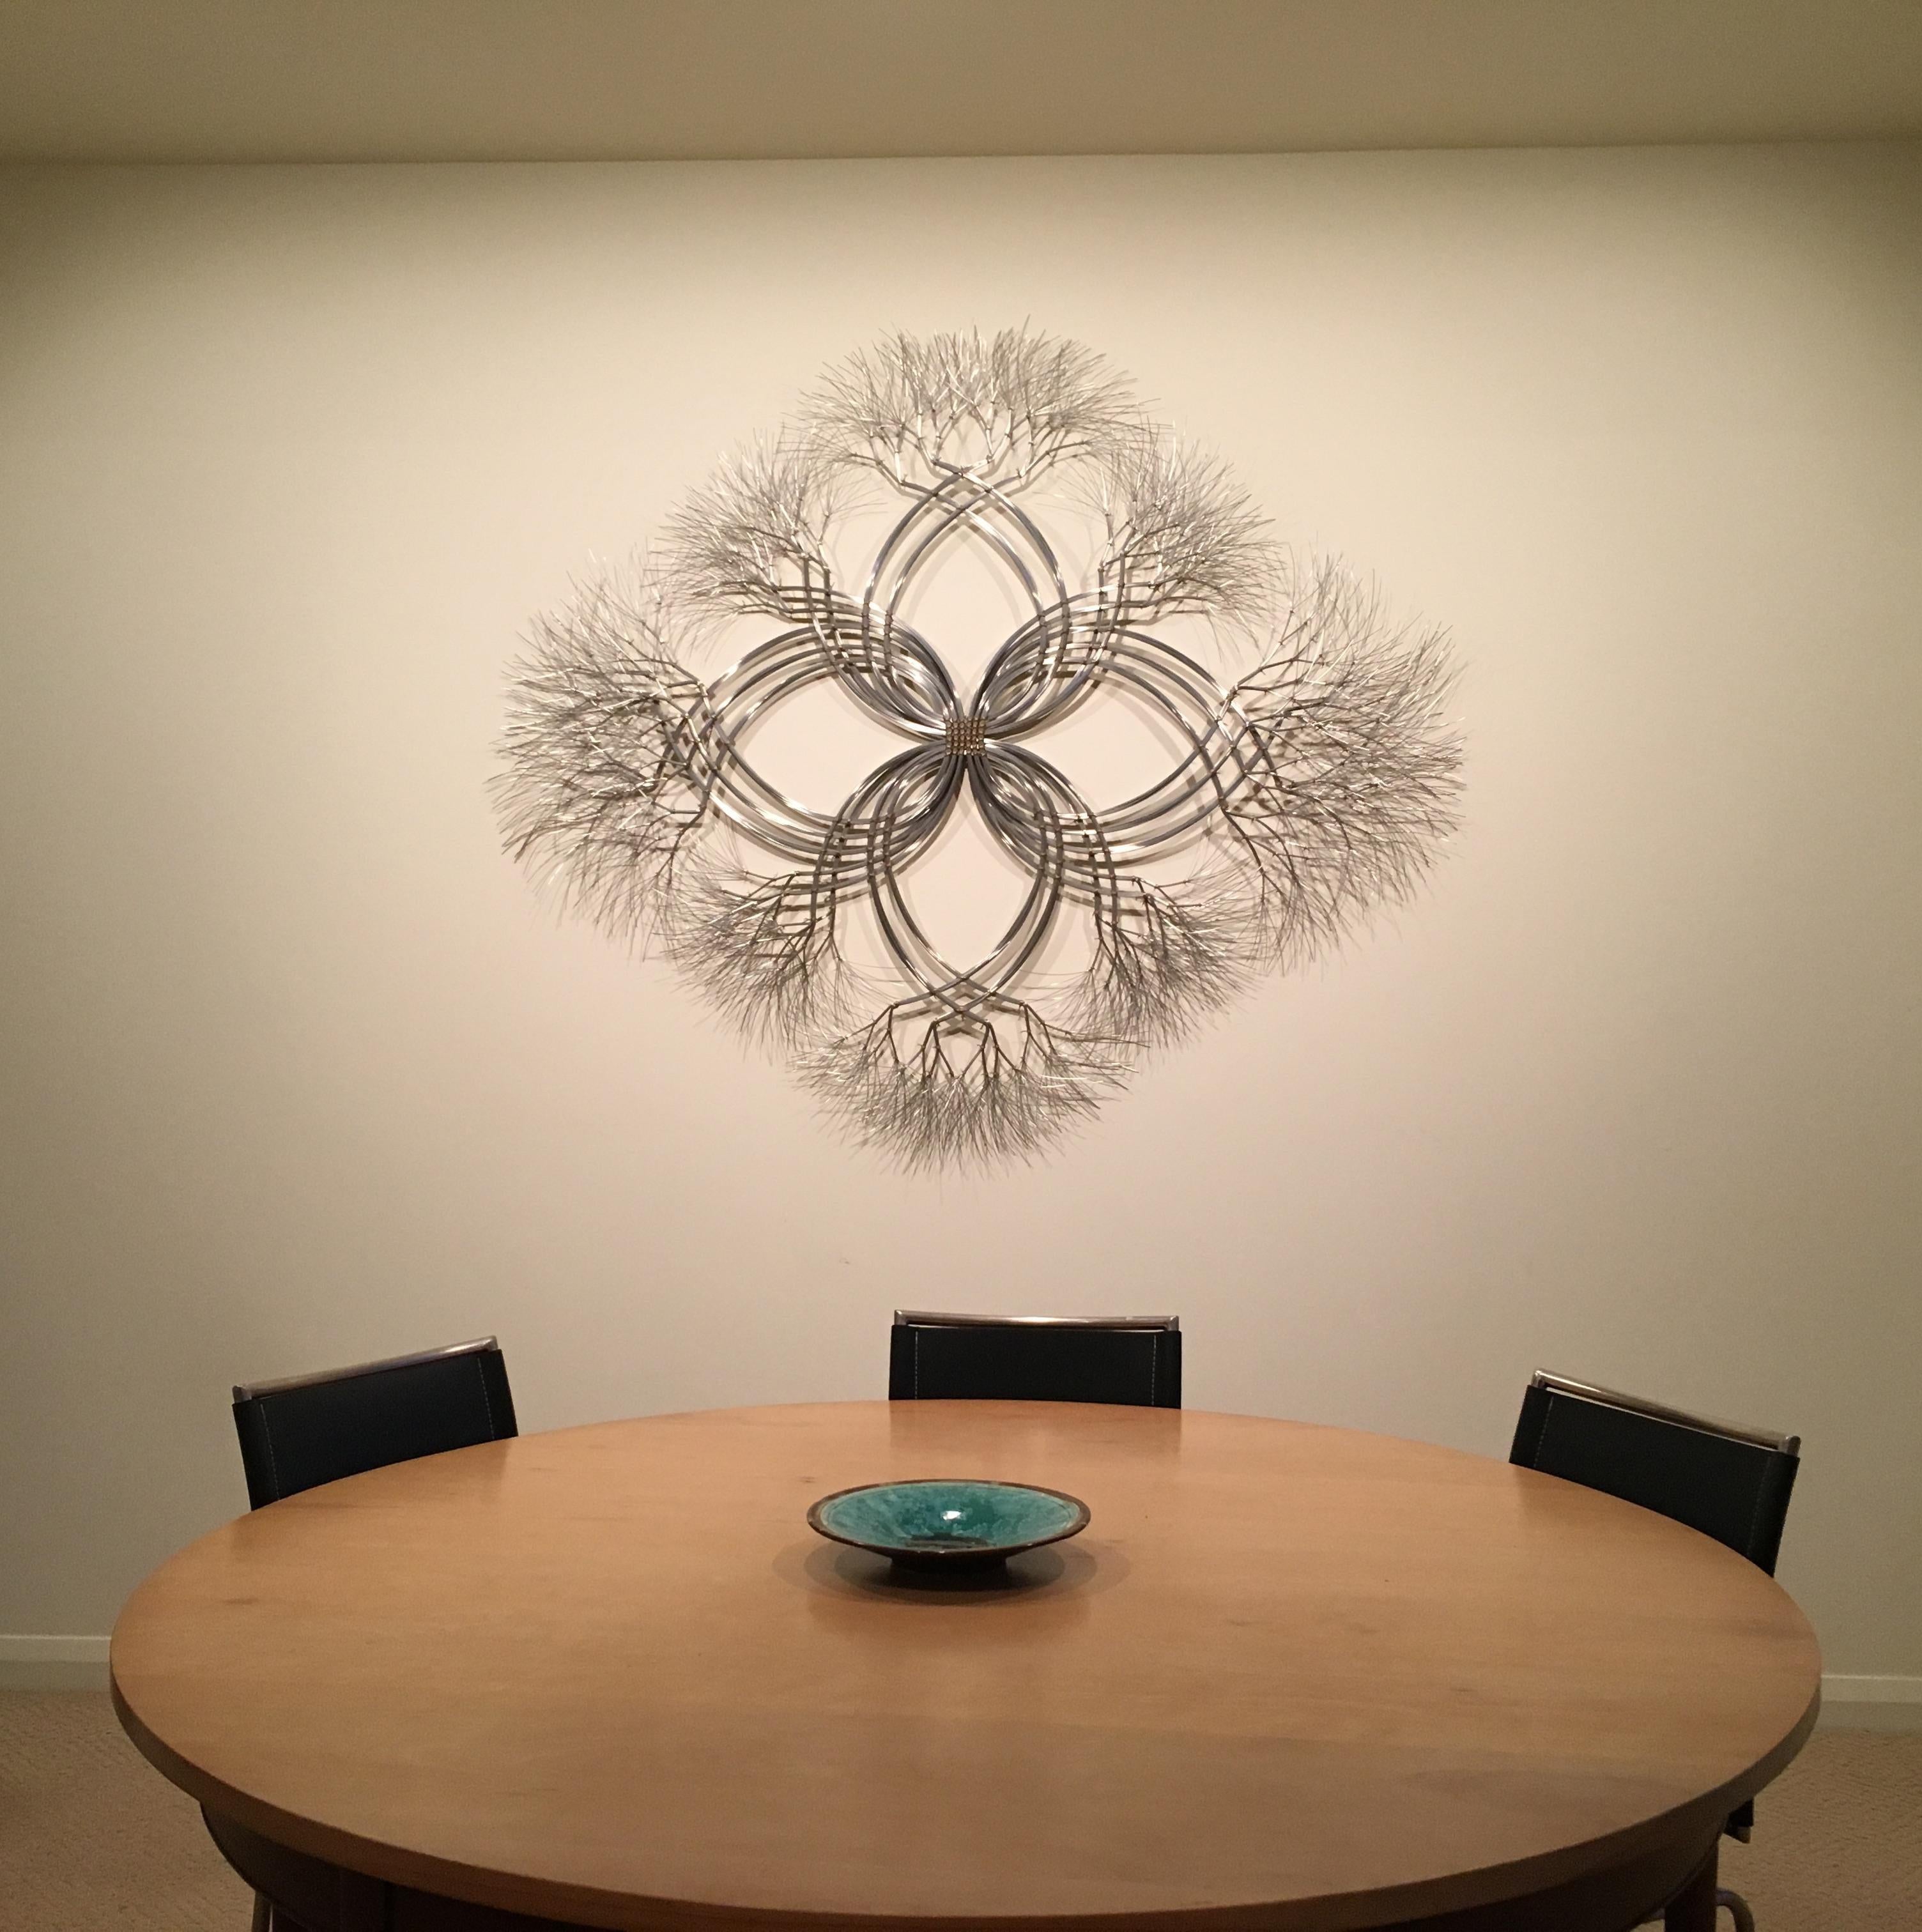 This wall mounted sculpture is created using bronze and stainless steel wire. Kue uses an aesthetic reminiscent of trees, electricity, and light to create sculptures of peace and beauty. Adults and children alike see snowflakes, trees, flowers,